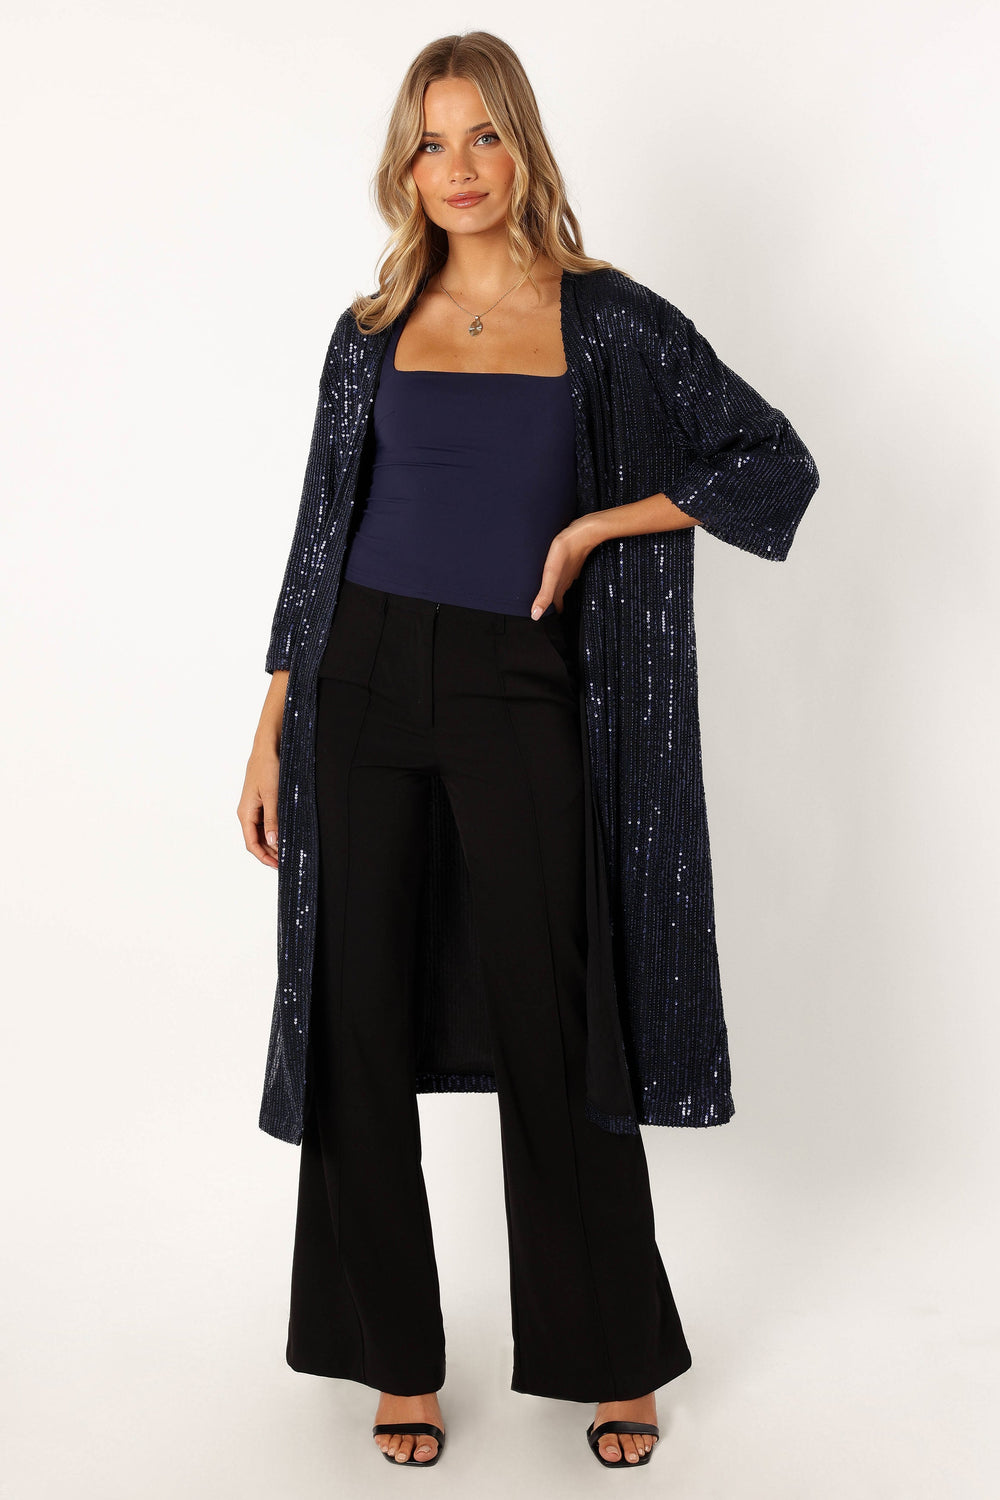 Petal and Pup USA OUTERWEAR Karsyn Open Front Sequin Duster - Navy